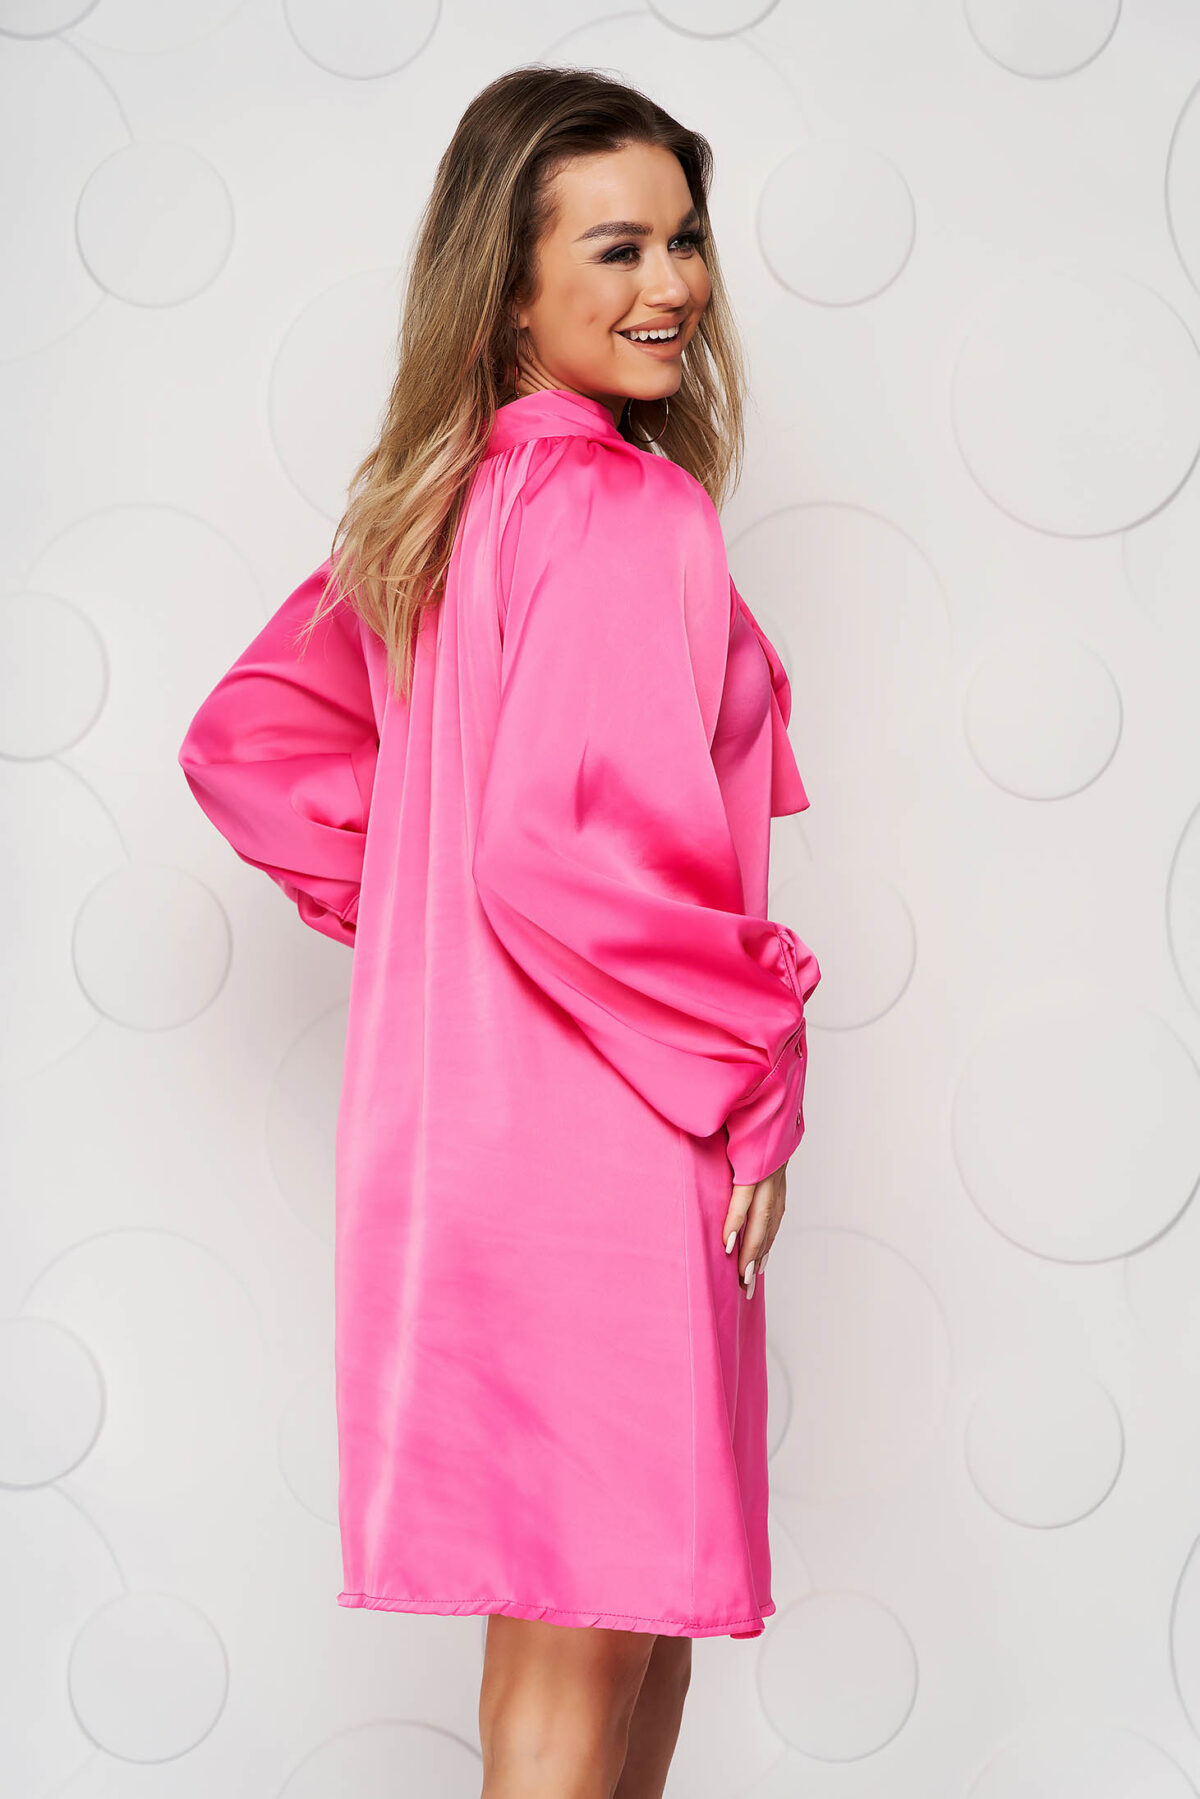 Pink Dress From Satin With Puffed Sleeves Loose Fit Bow Accessory